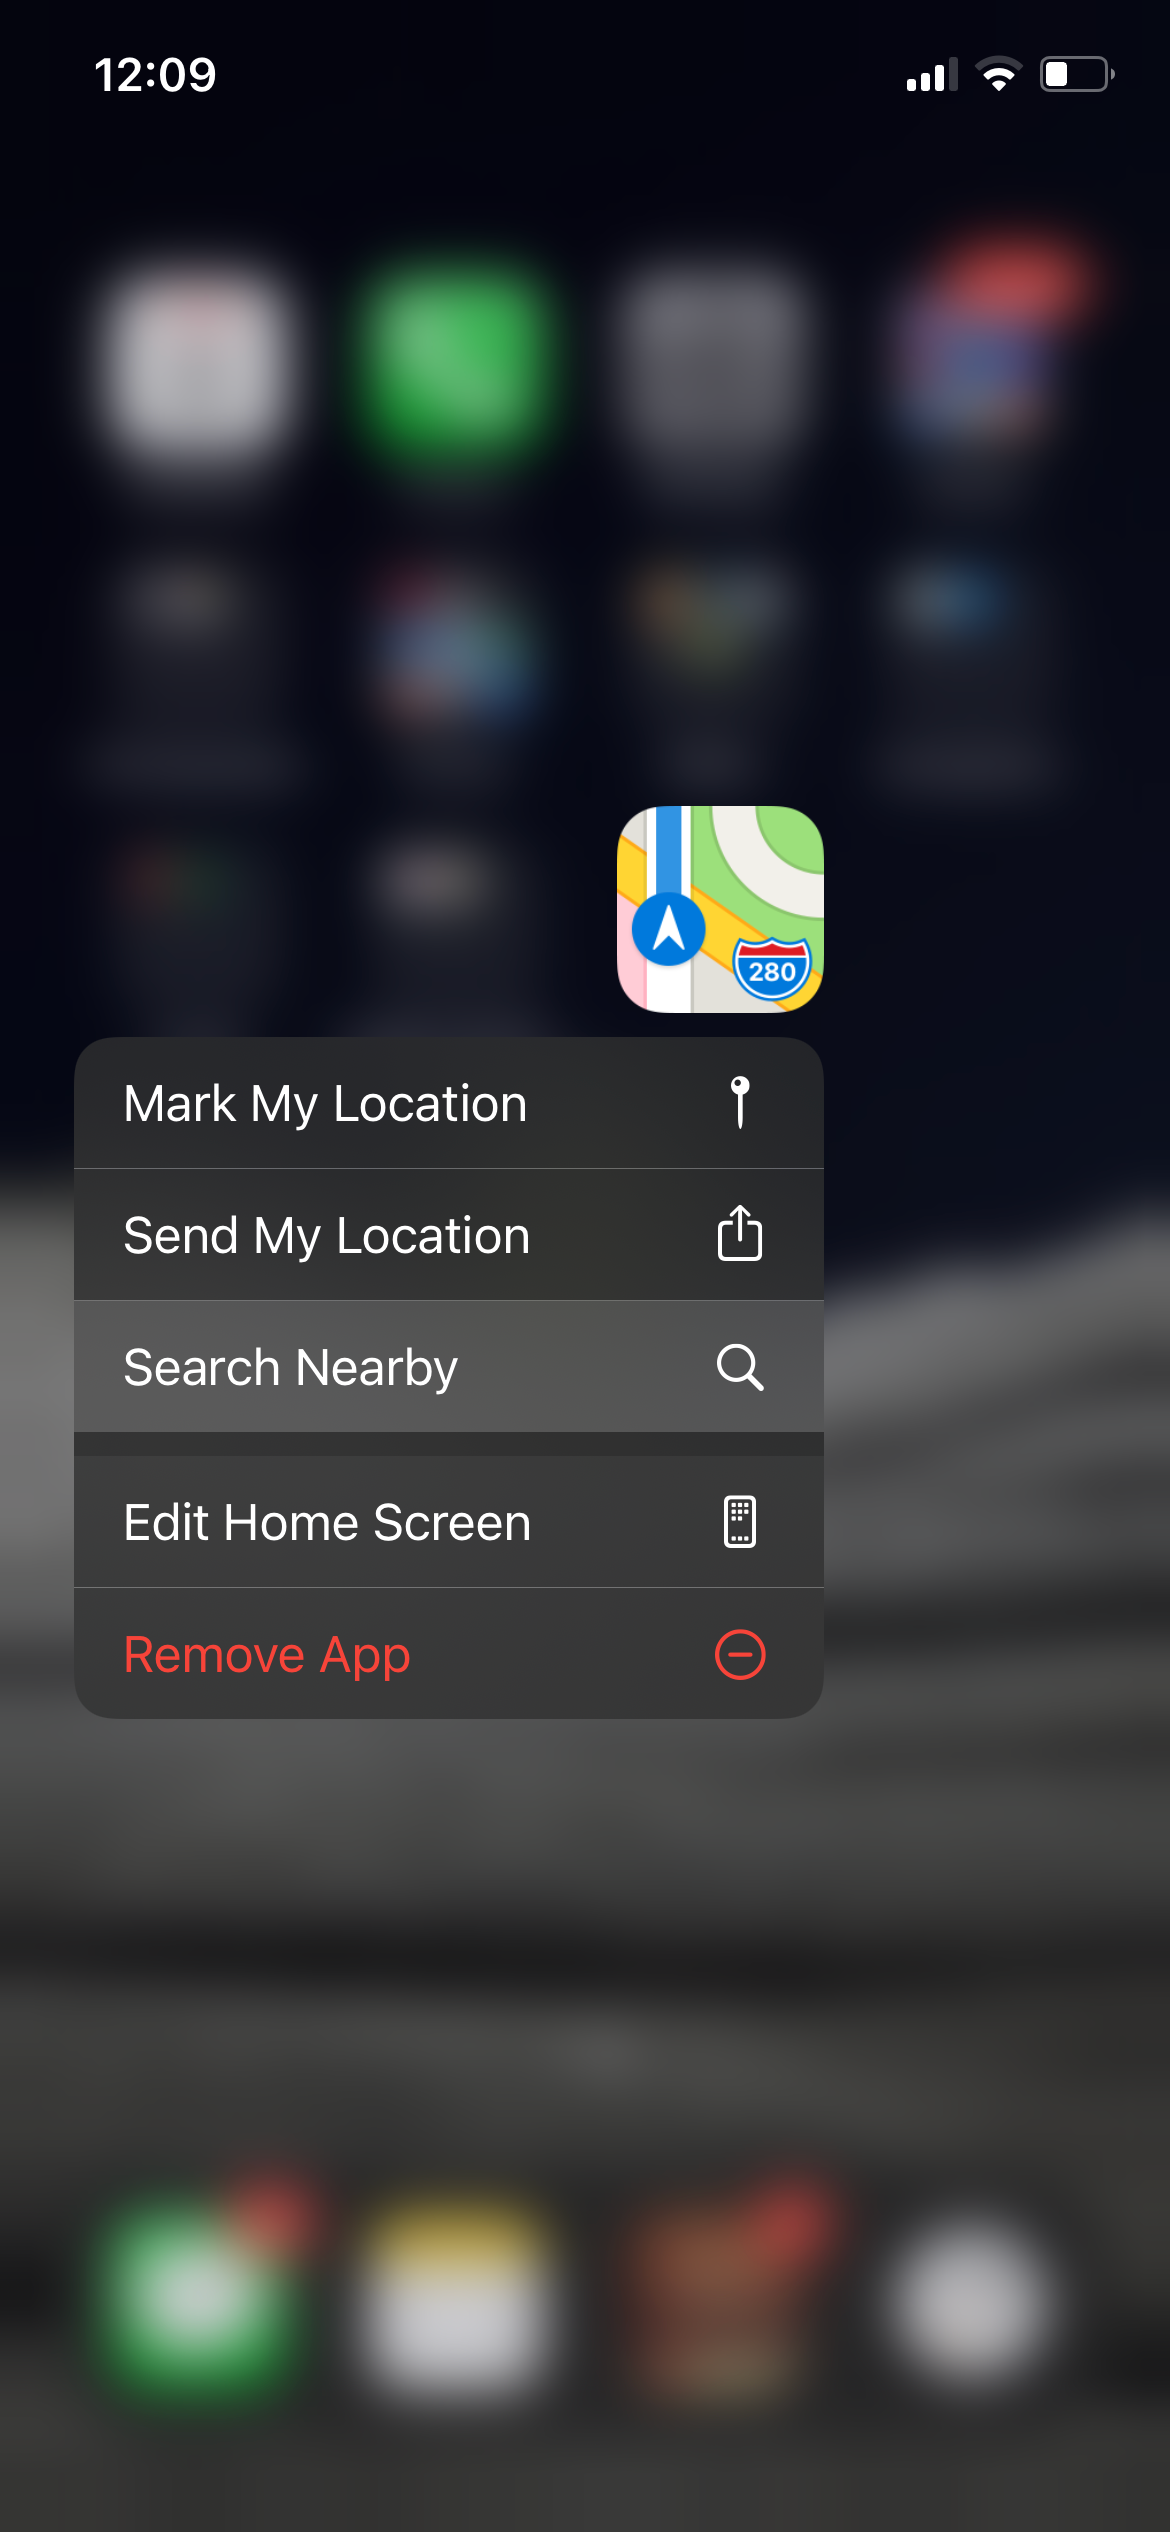 Apple Map on Home Screen